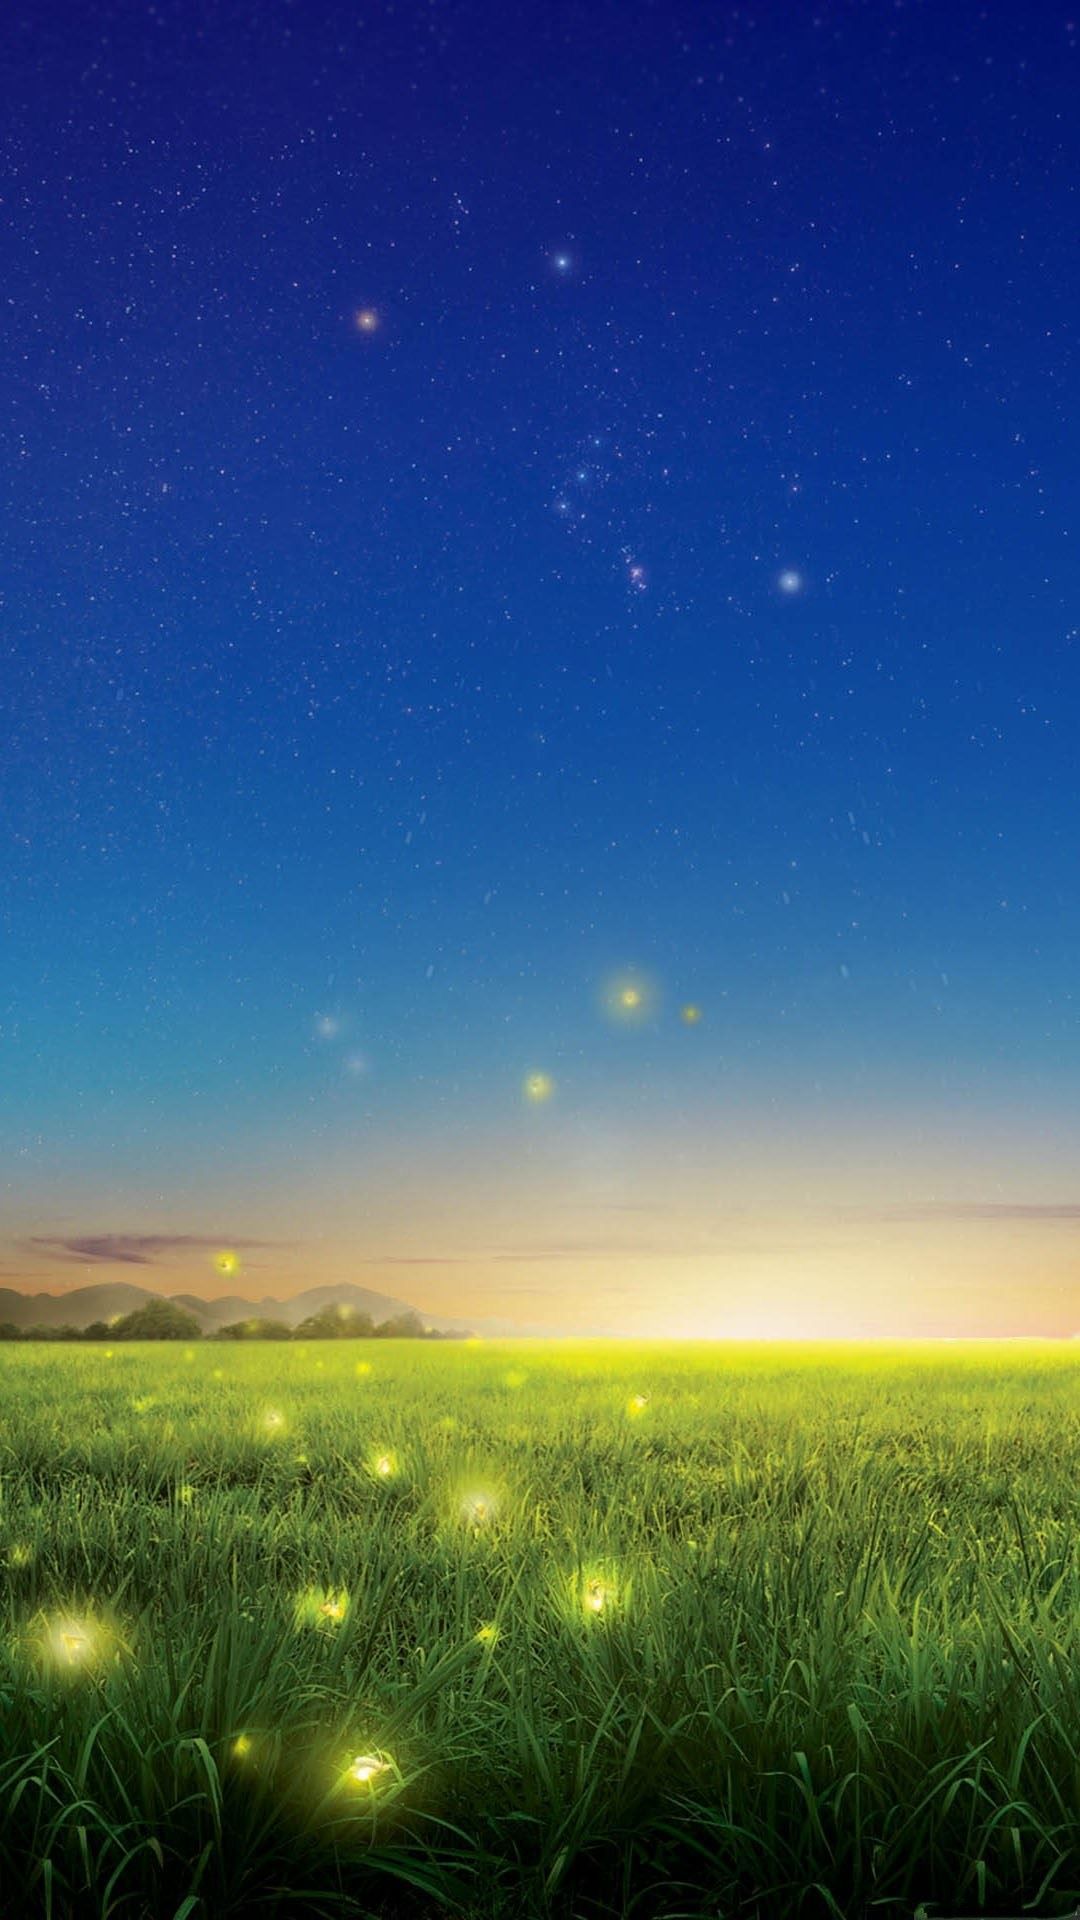 Fireflies Country Field Fantasy Light Android Wallpaper free download